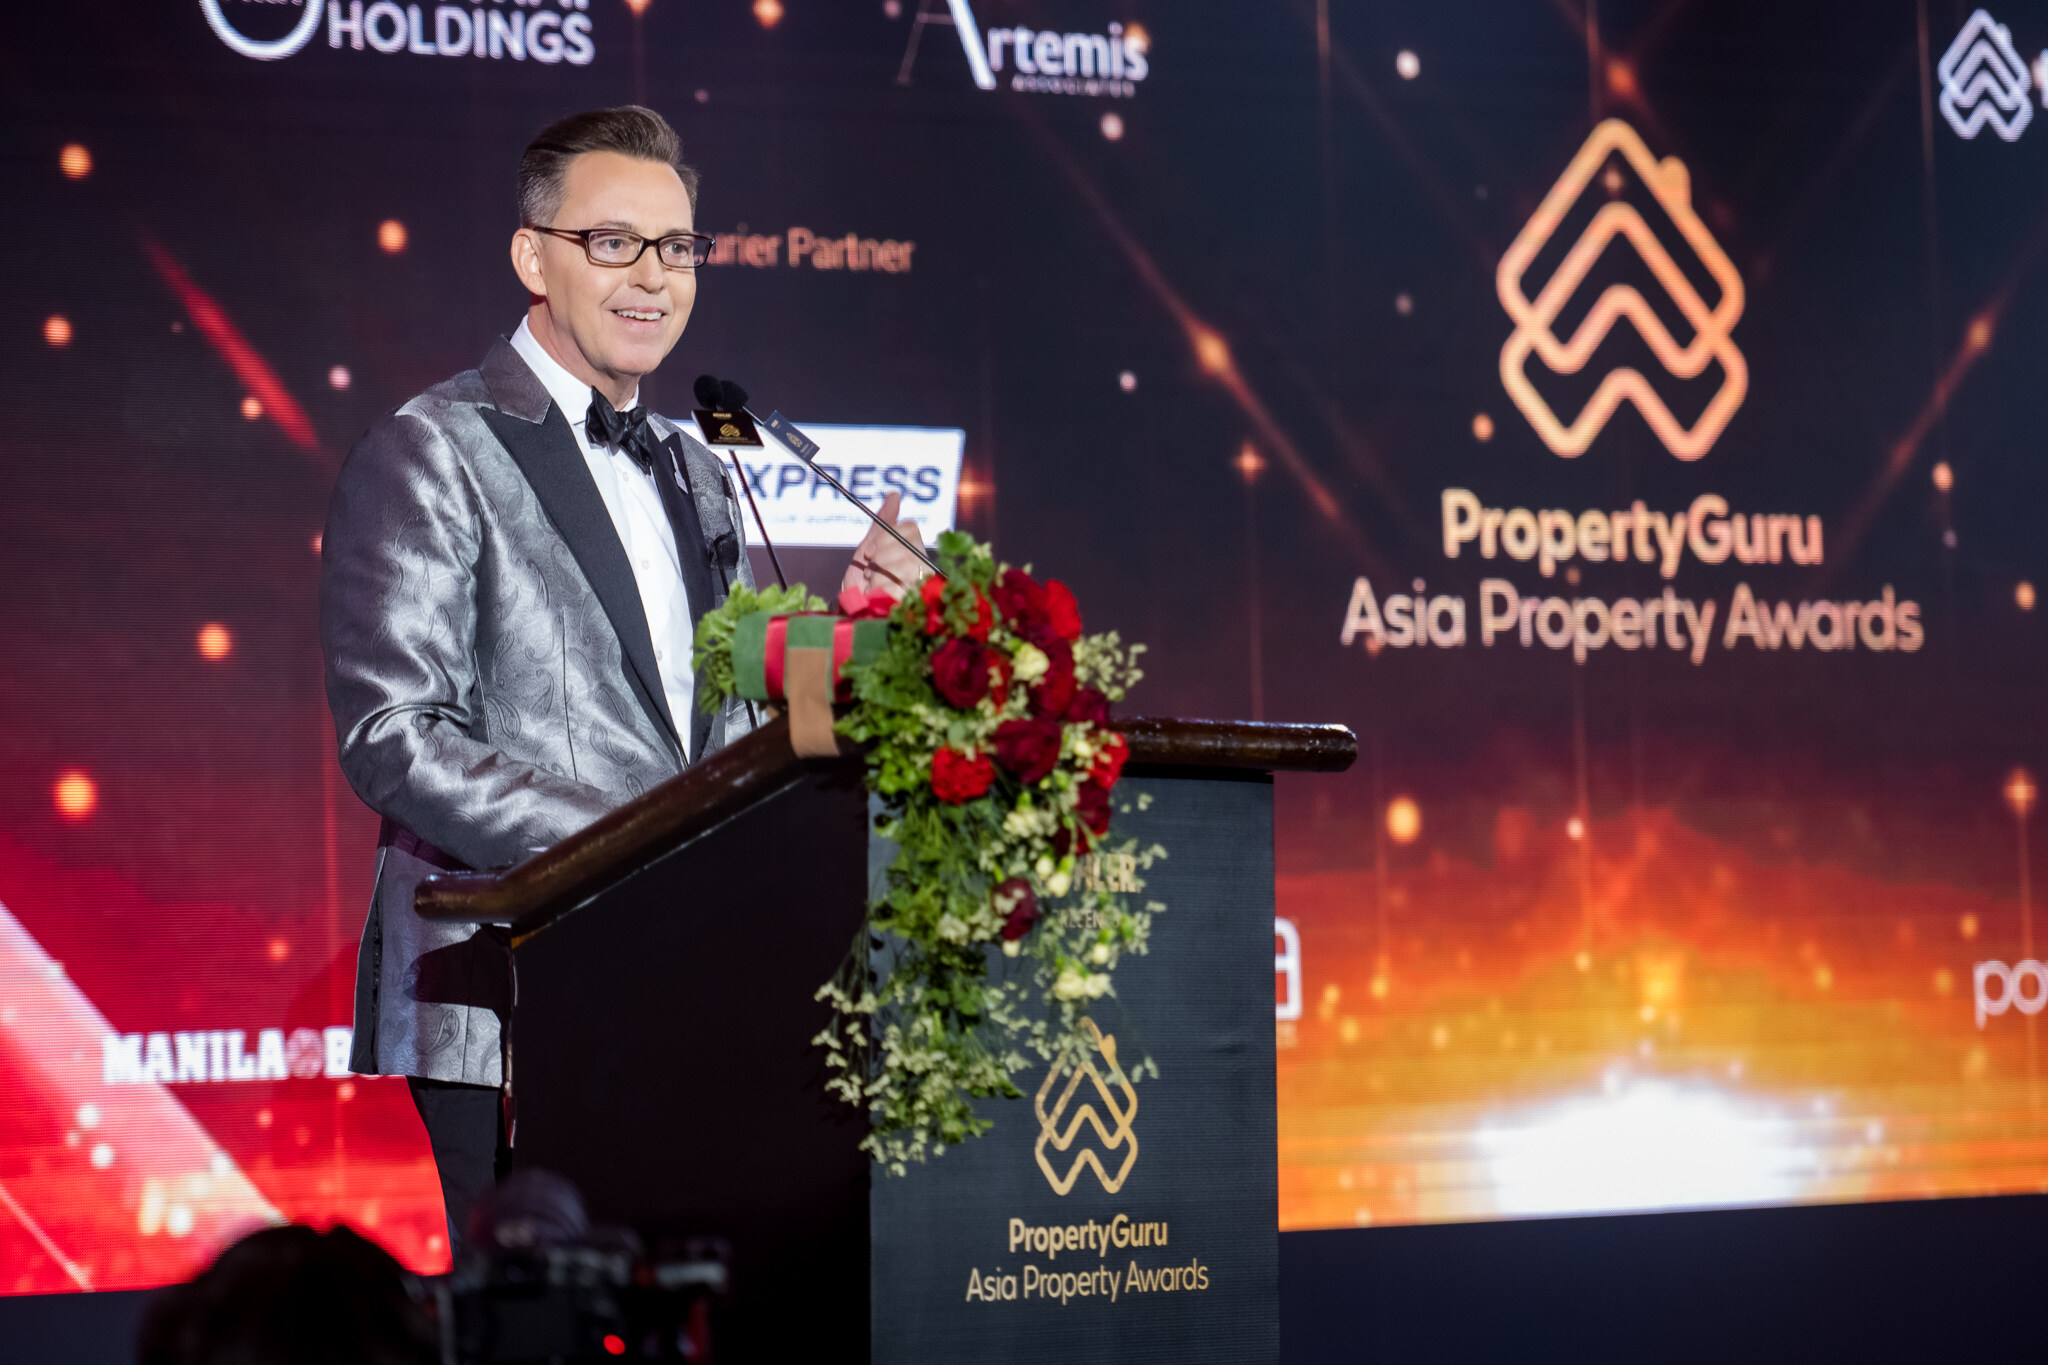 Jules Kay, General Manager of PropertyGuru Asia Property Awards and Events